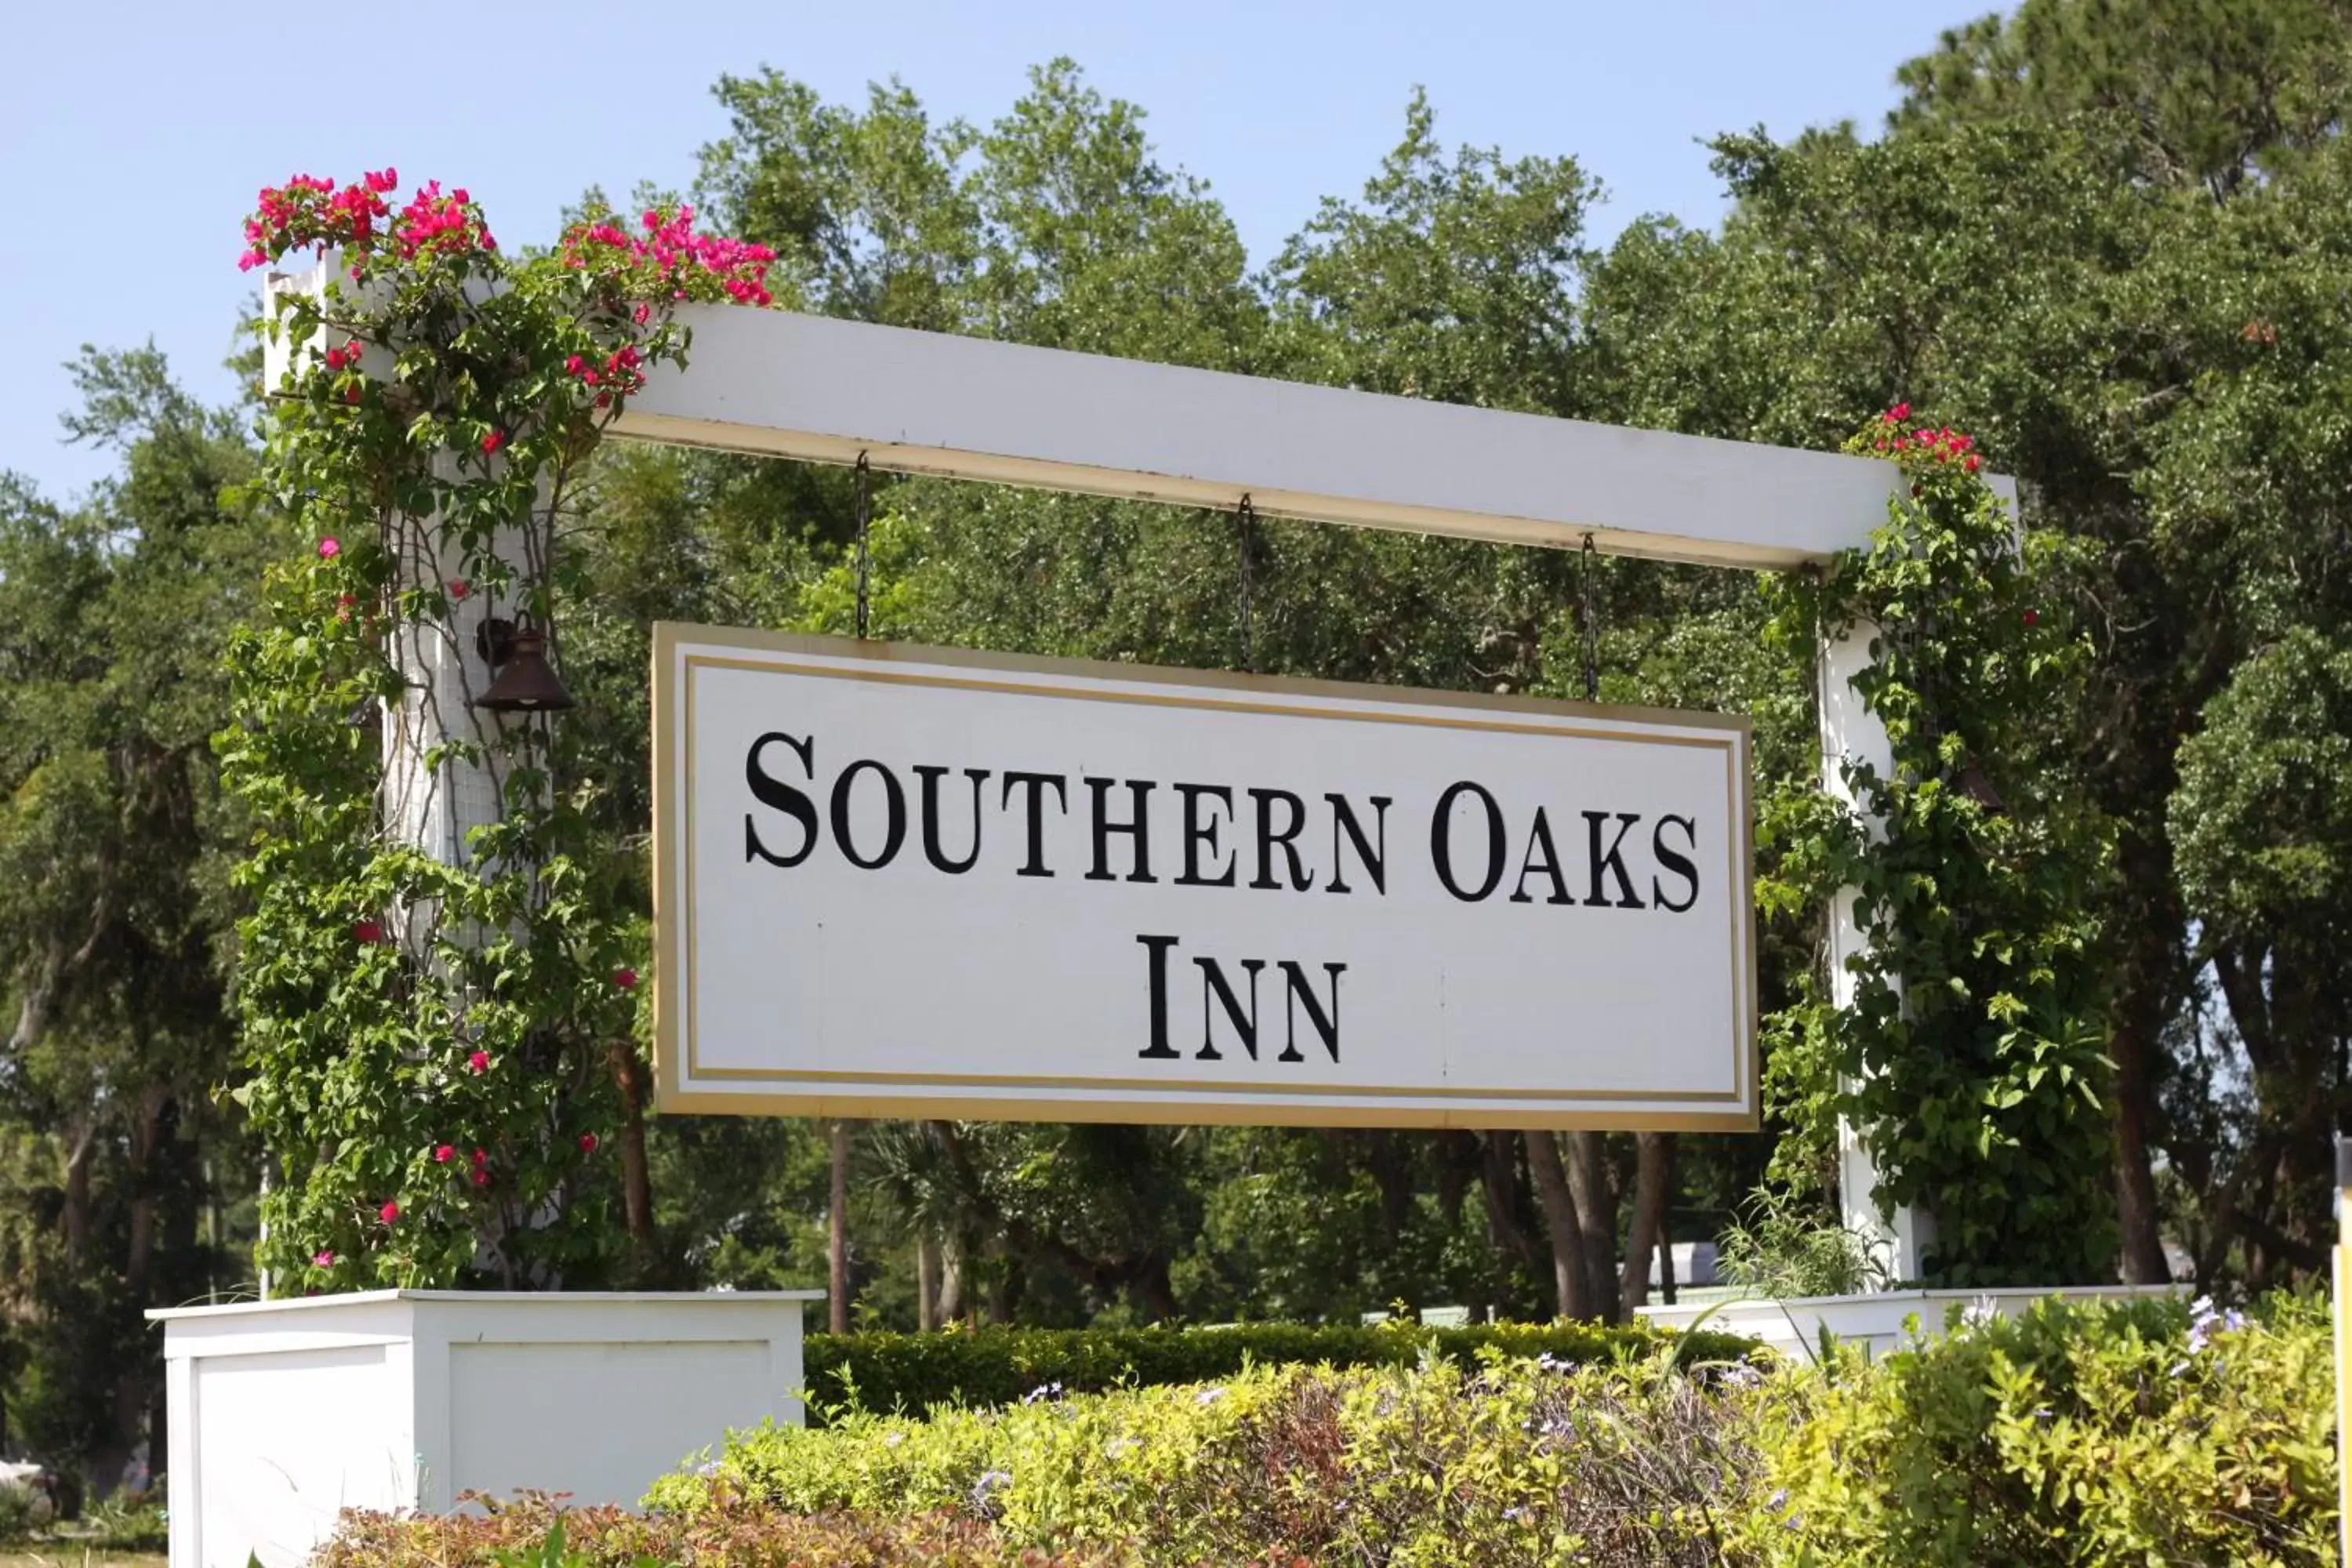 Property logo or sign in Southern Oaks Inn - Saint Augustine